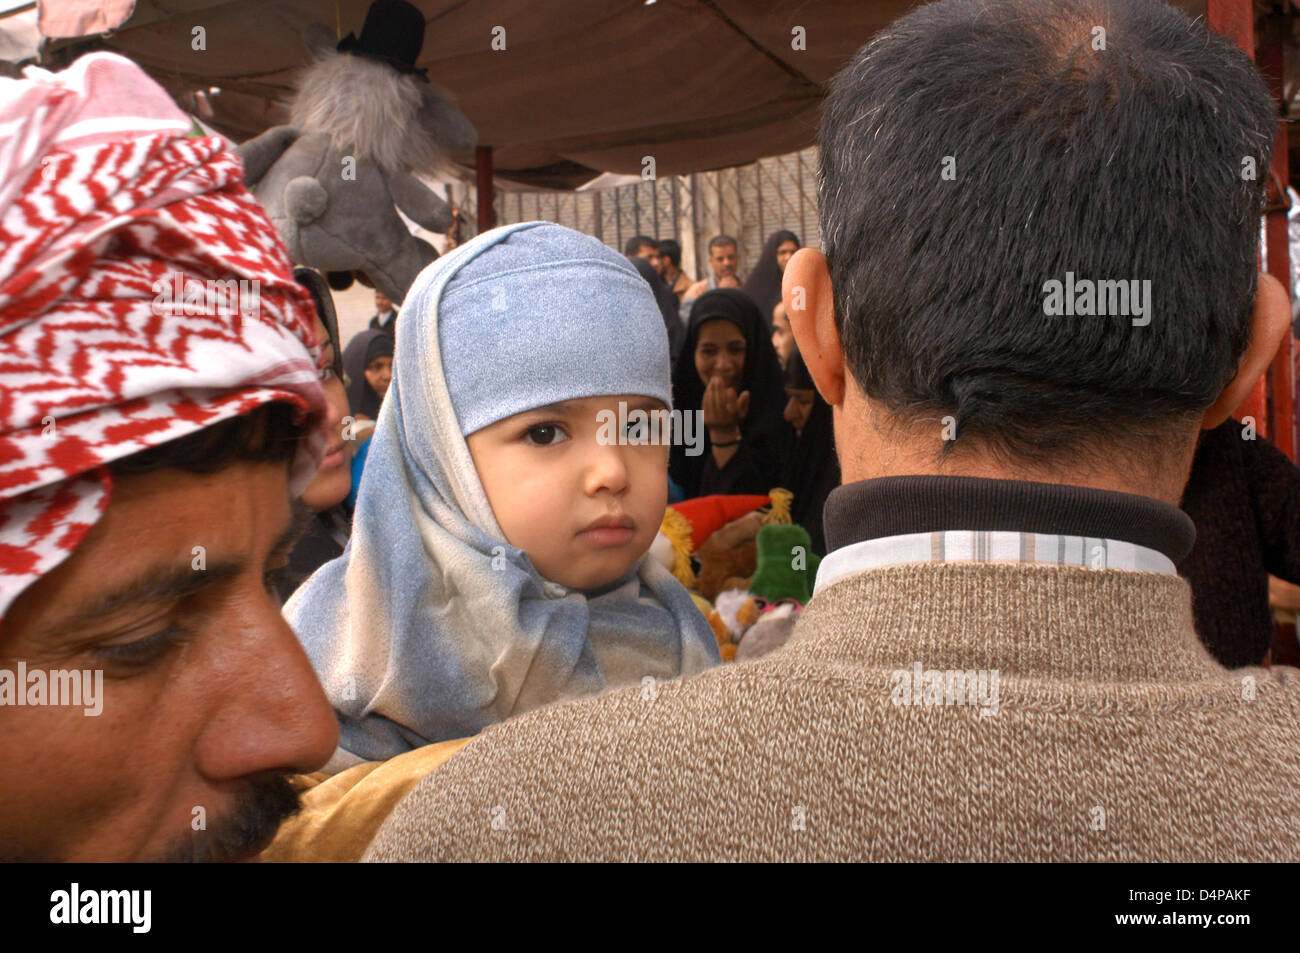 Market Diwaniyah. A family is buying with your child on the streets of downtown. Stock Photo